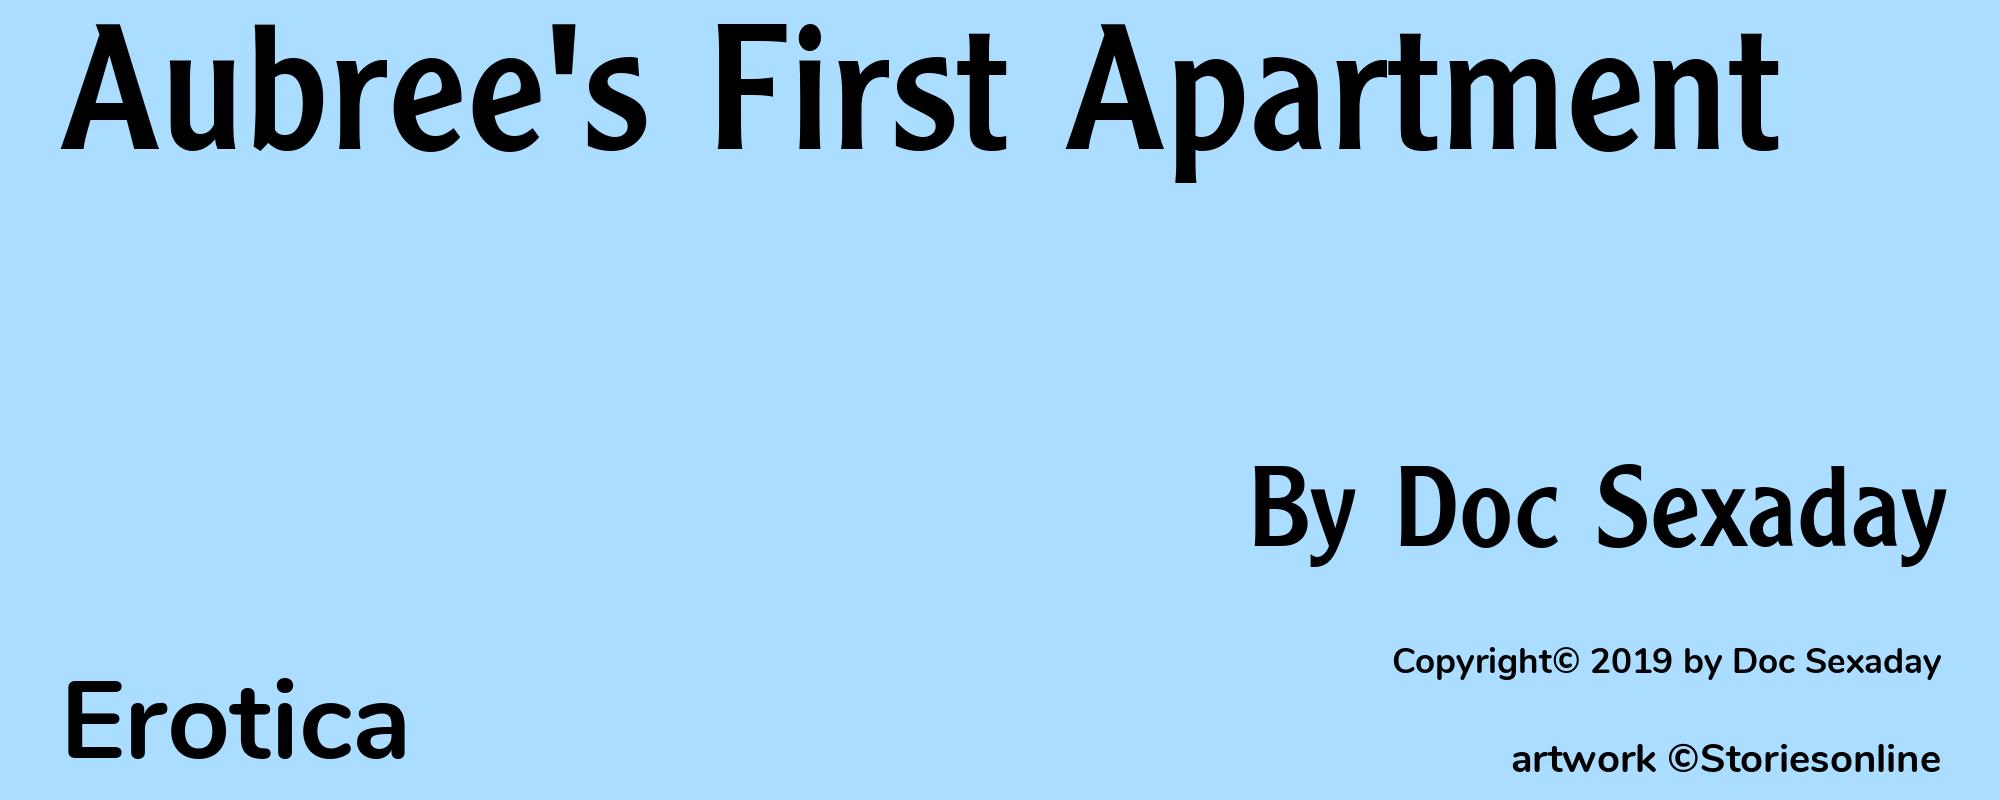 Aubree's First Apartment - Cover